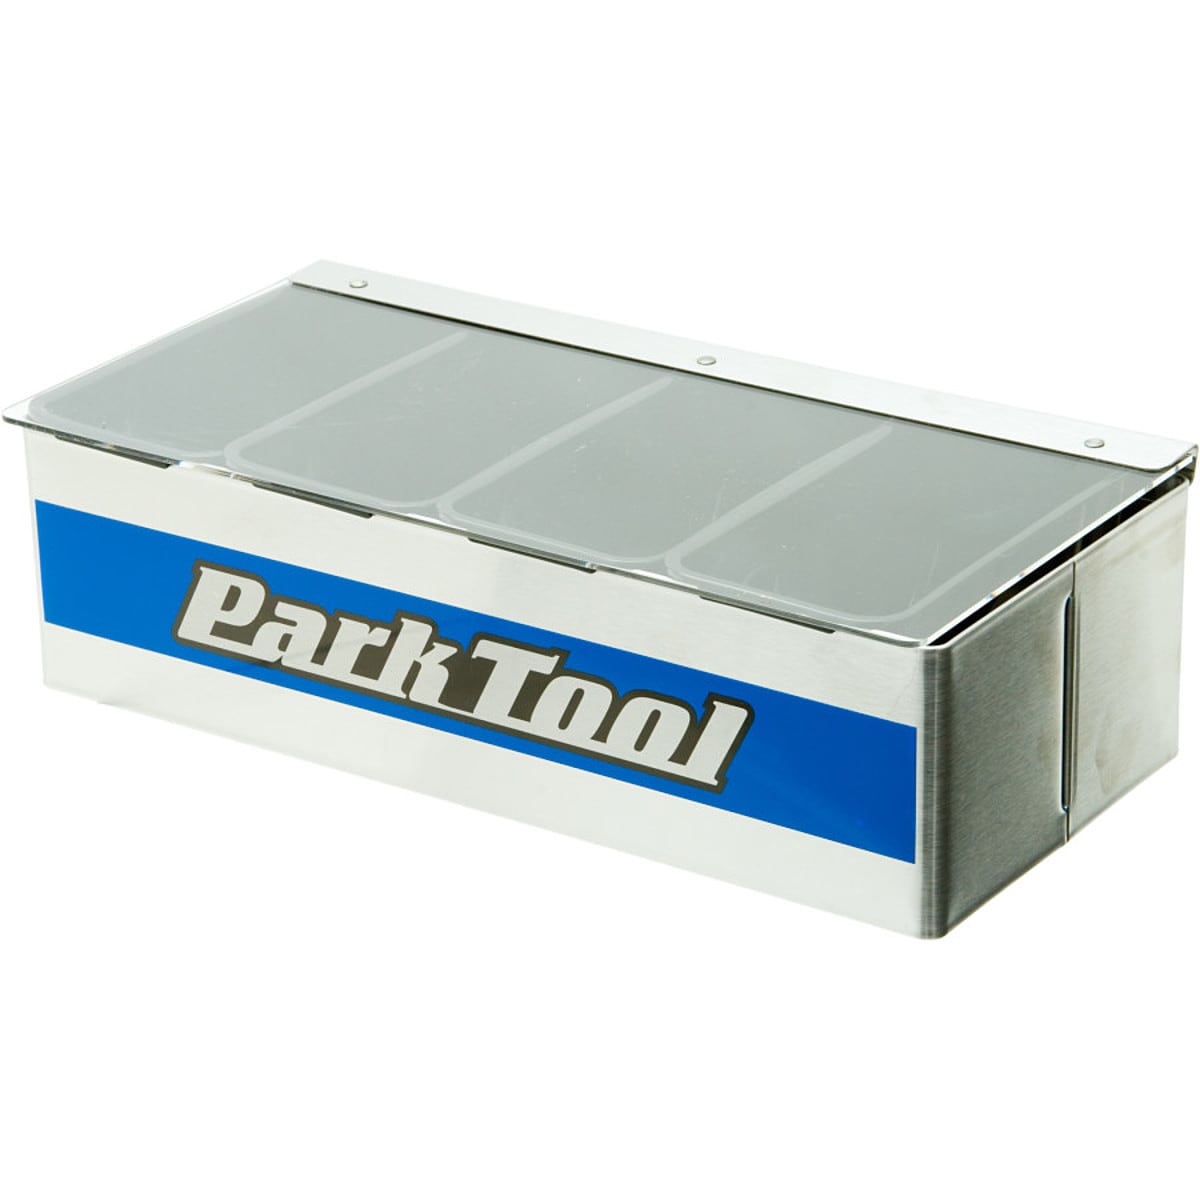 Park Tool Bench Top Small Parts Holder JH 1